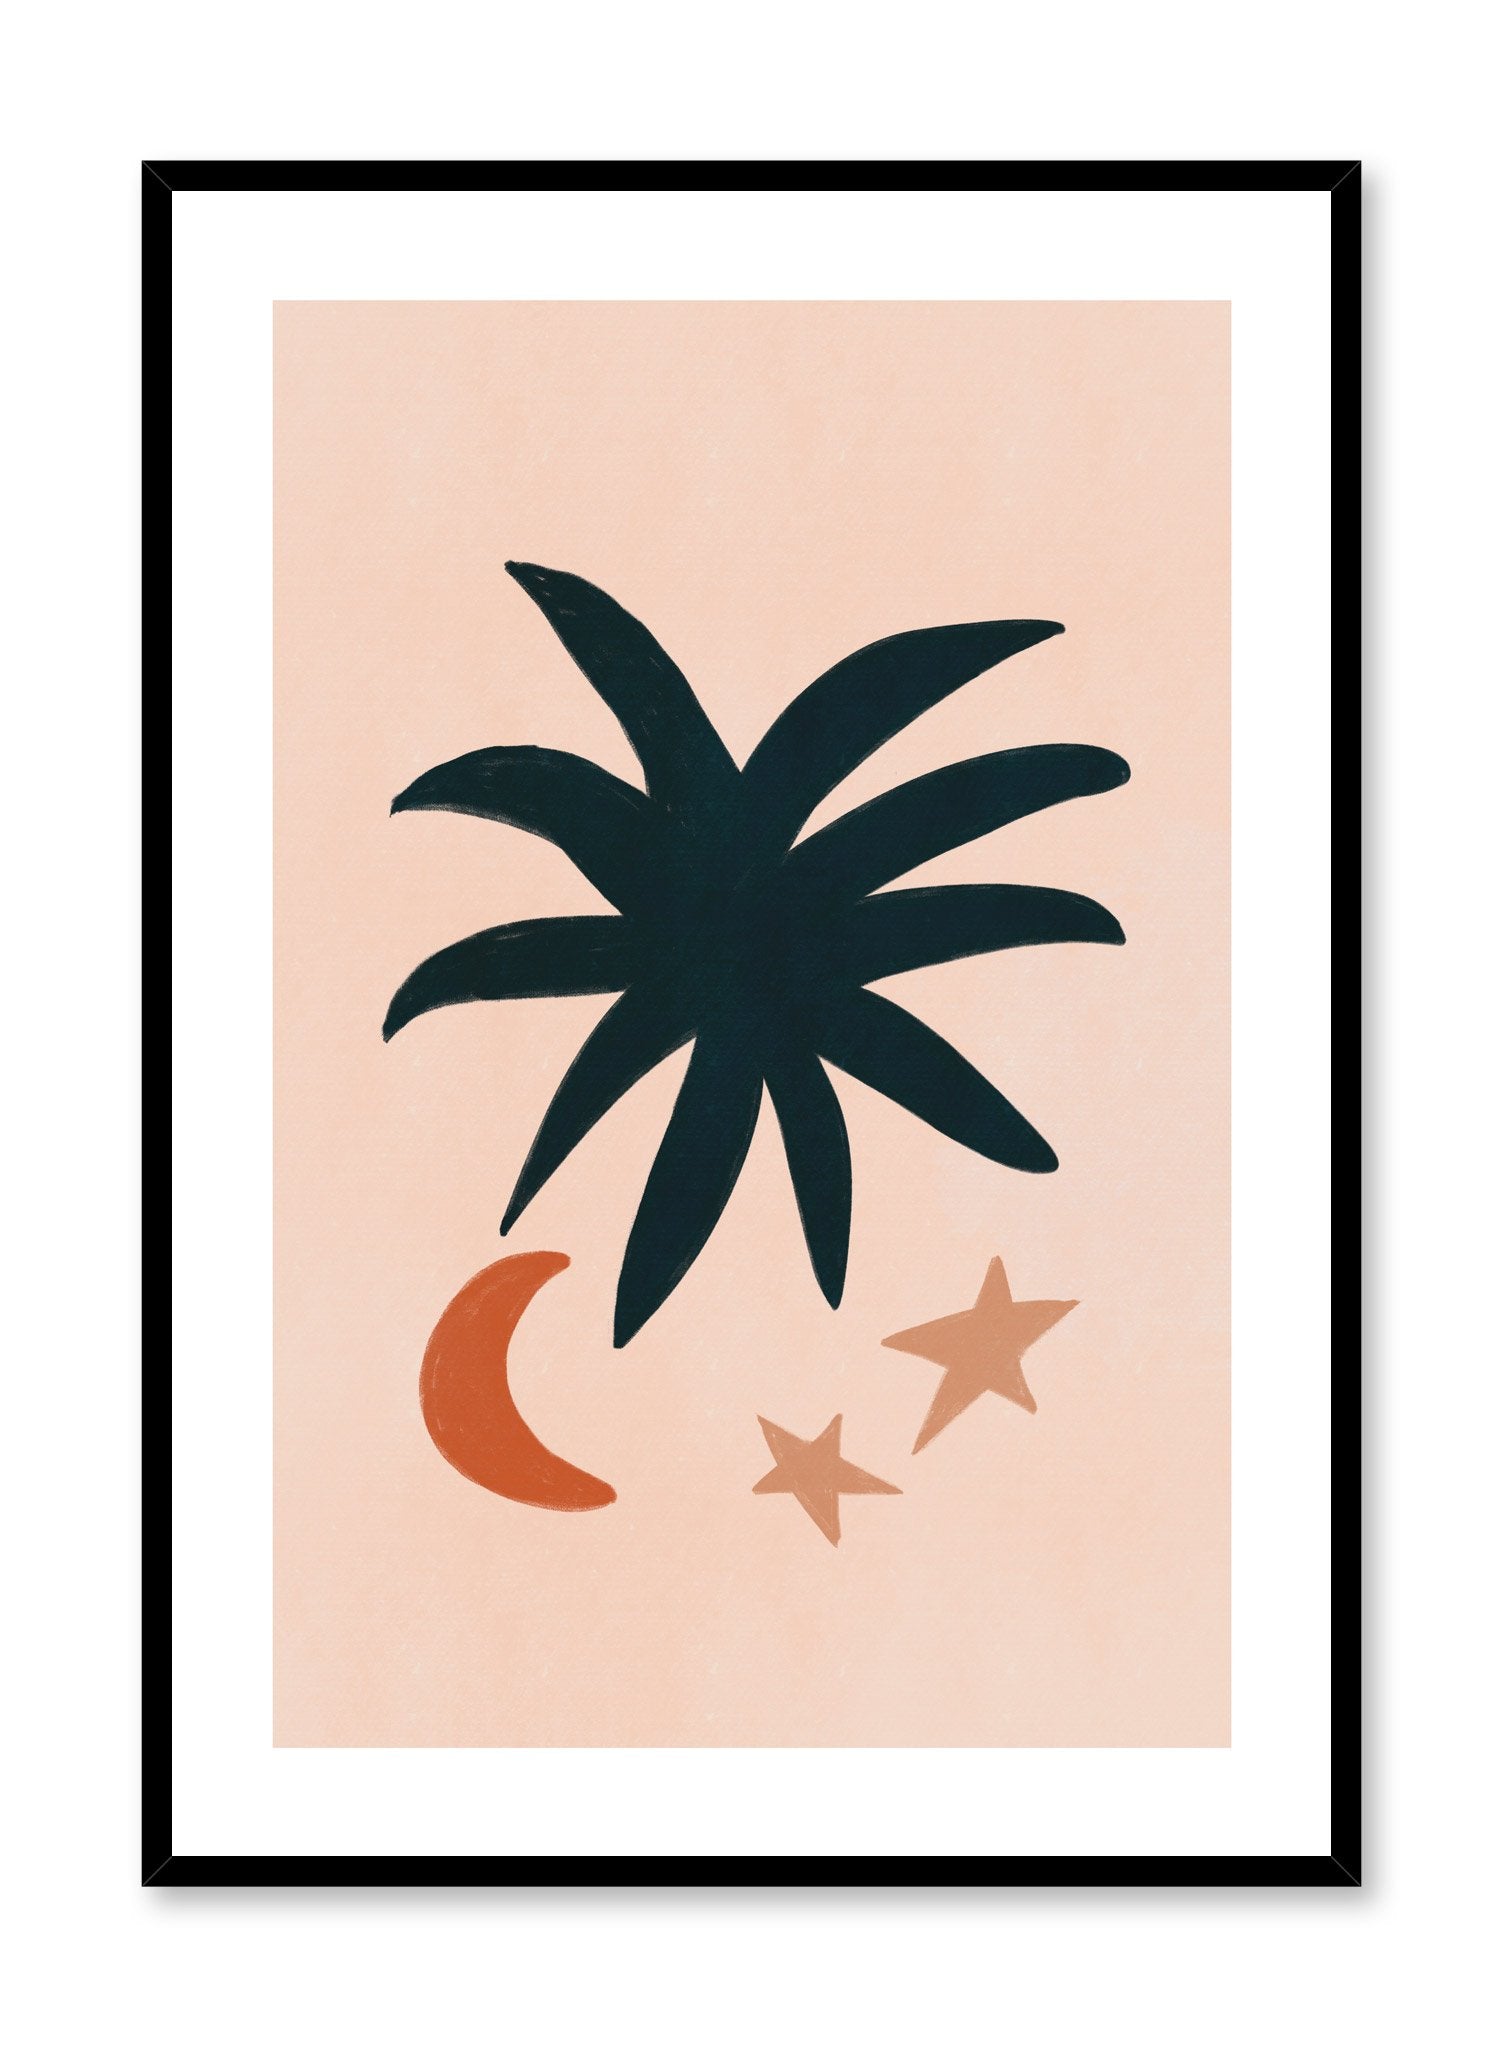 Modern minimalist illustration poster by Opposite Wall with stars and moons.